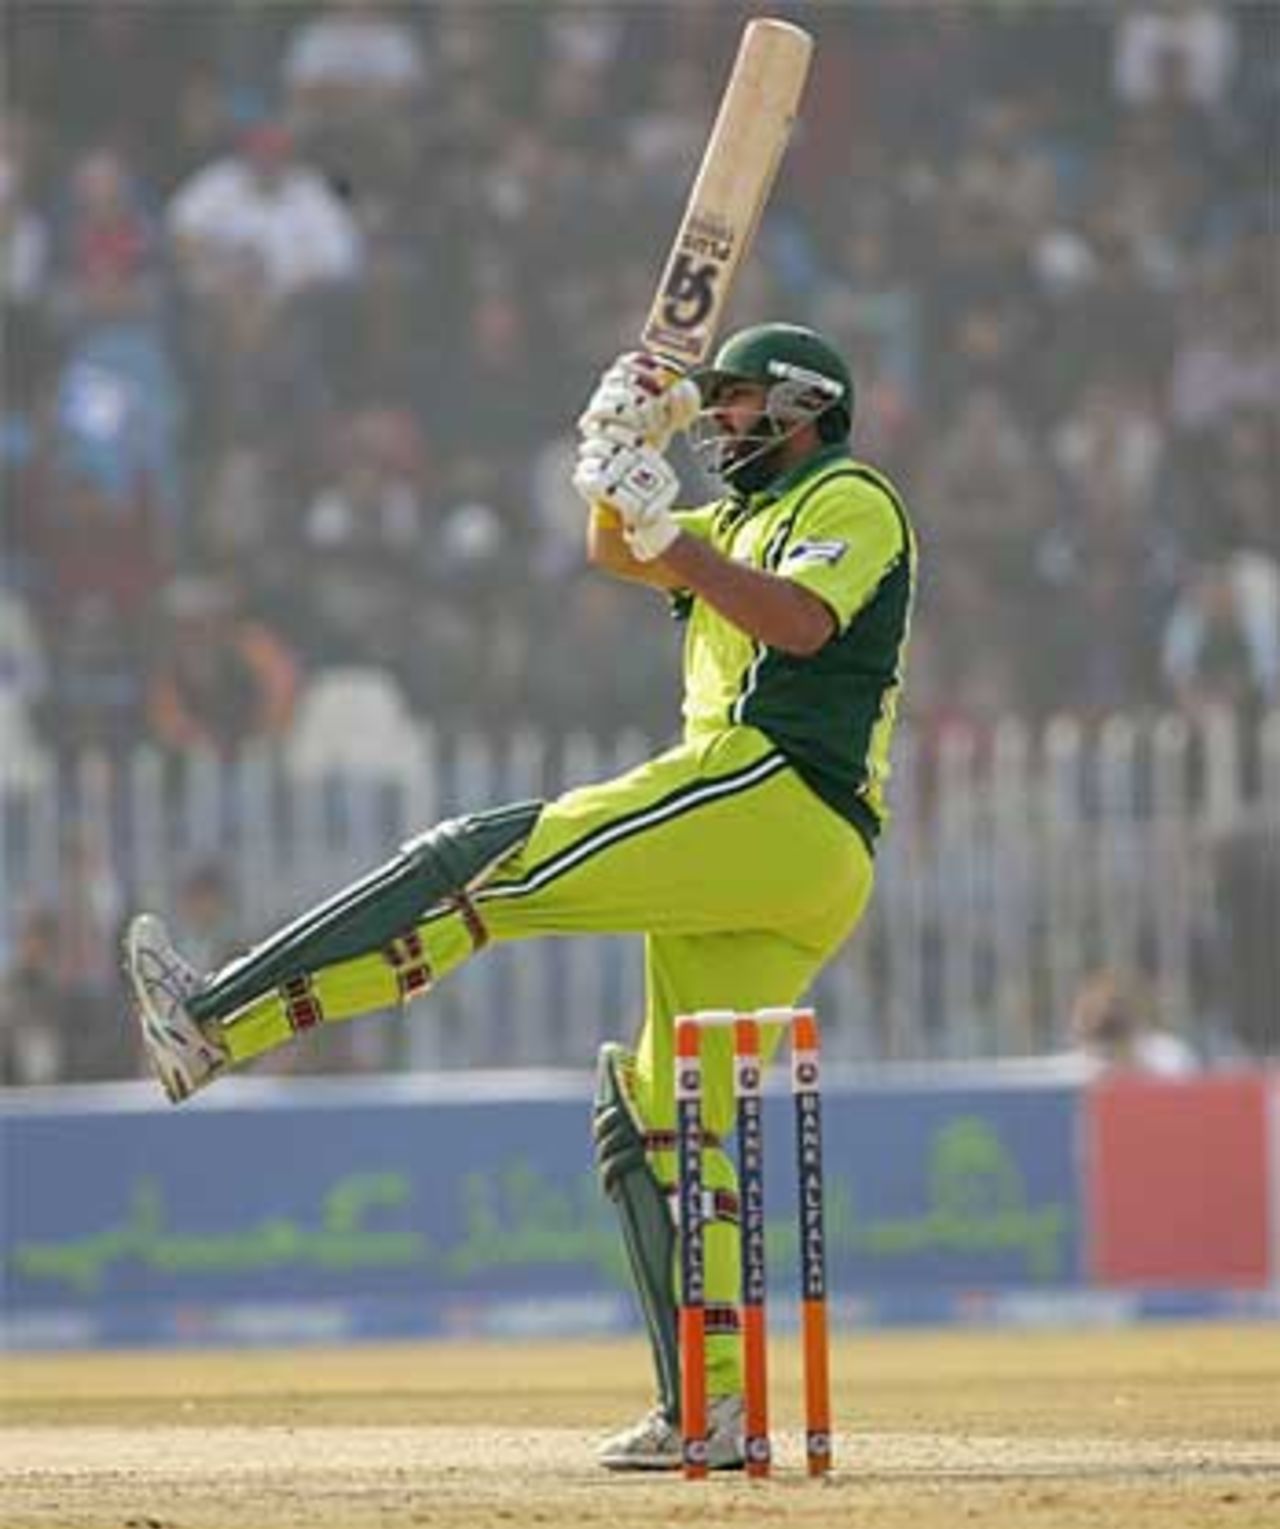 Inzamam-ul-Haq's Pakistan side are favourites to beat India in the one-day series